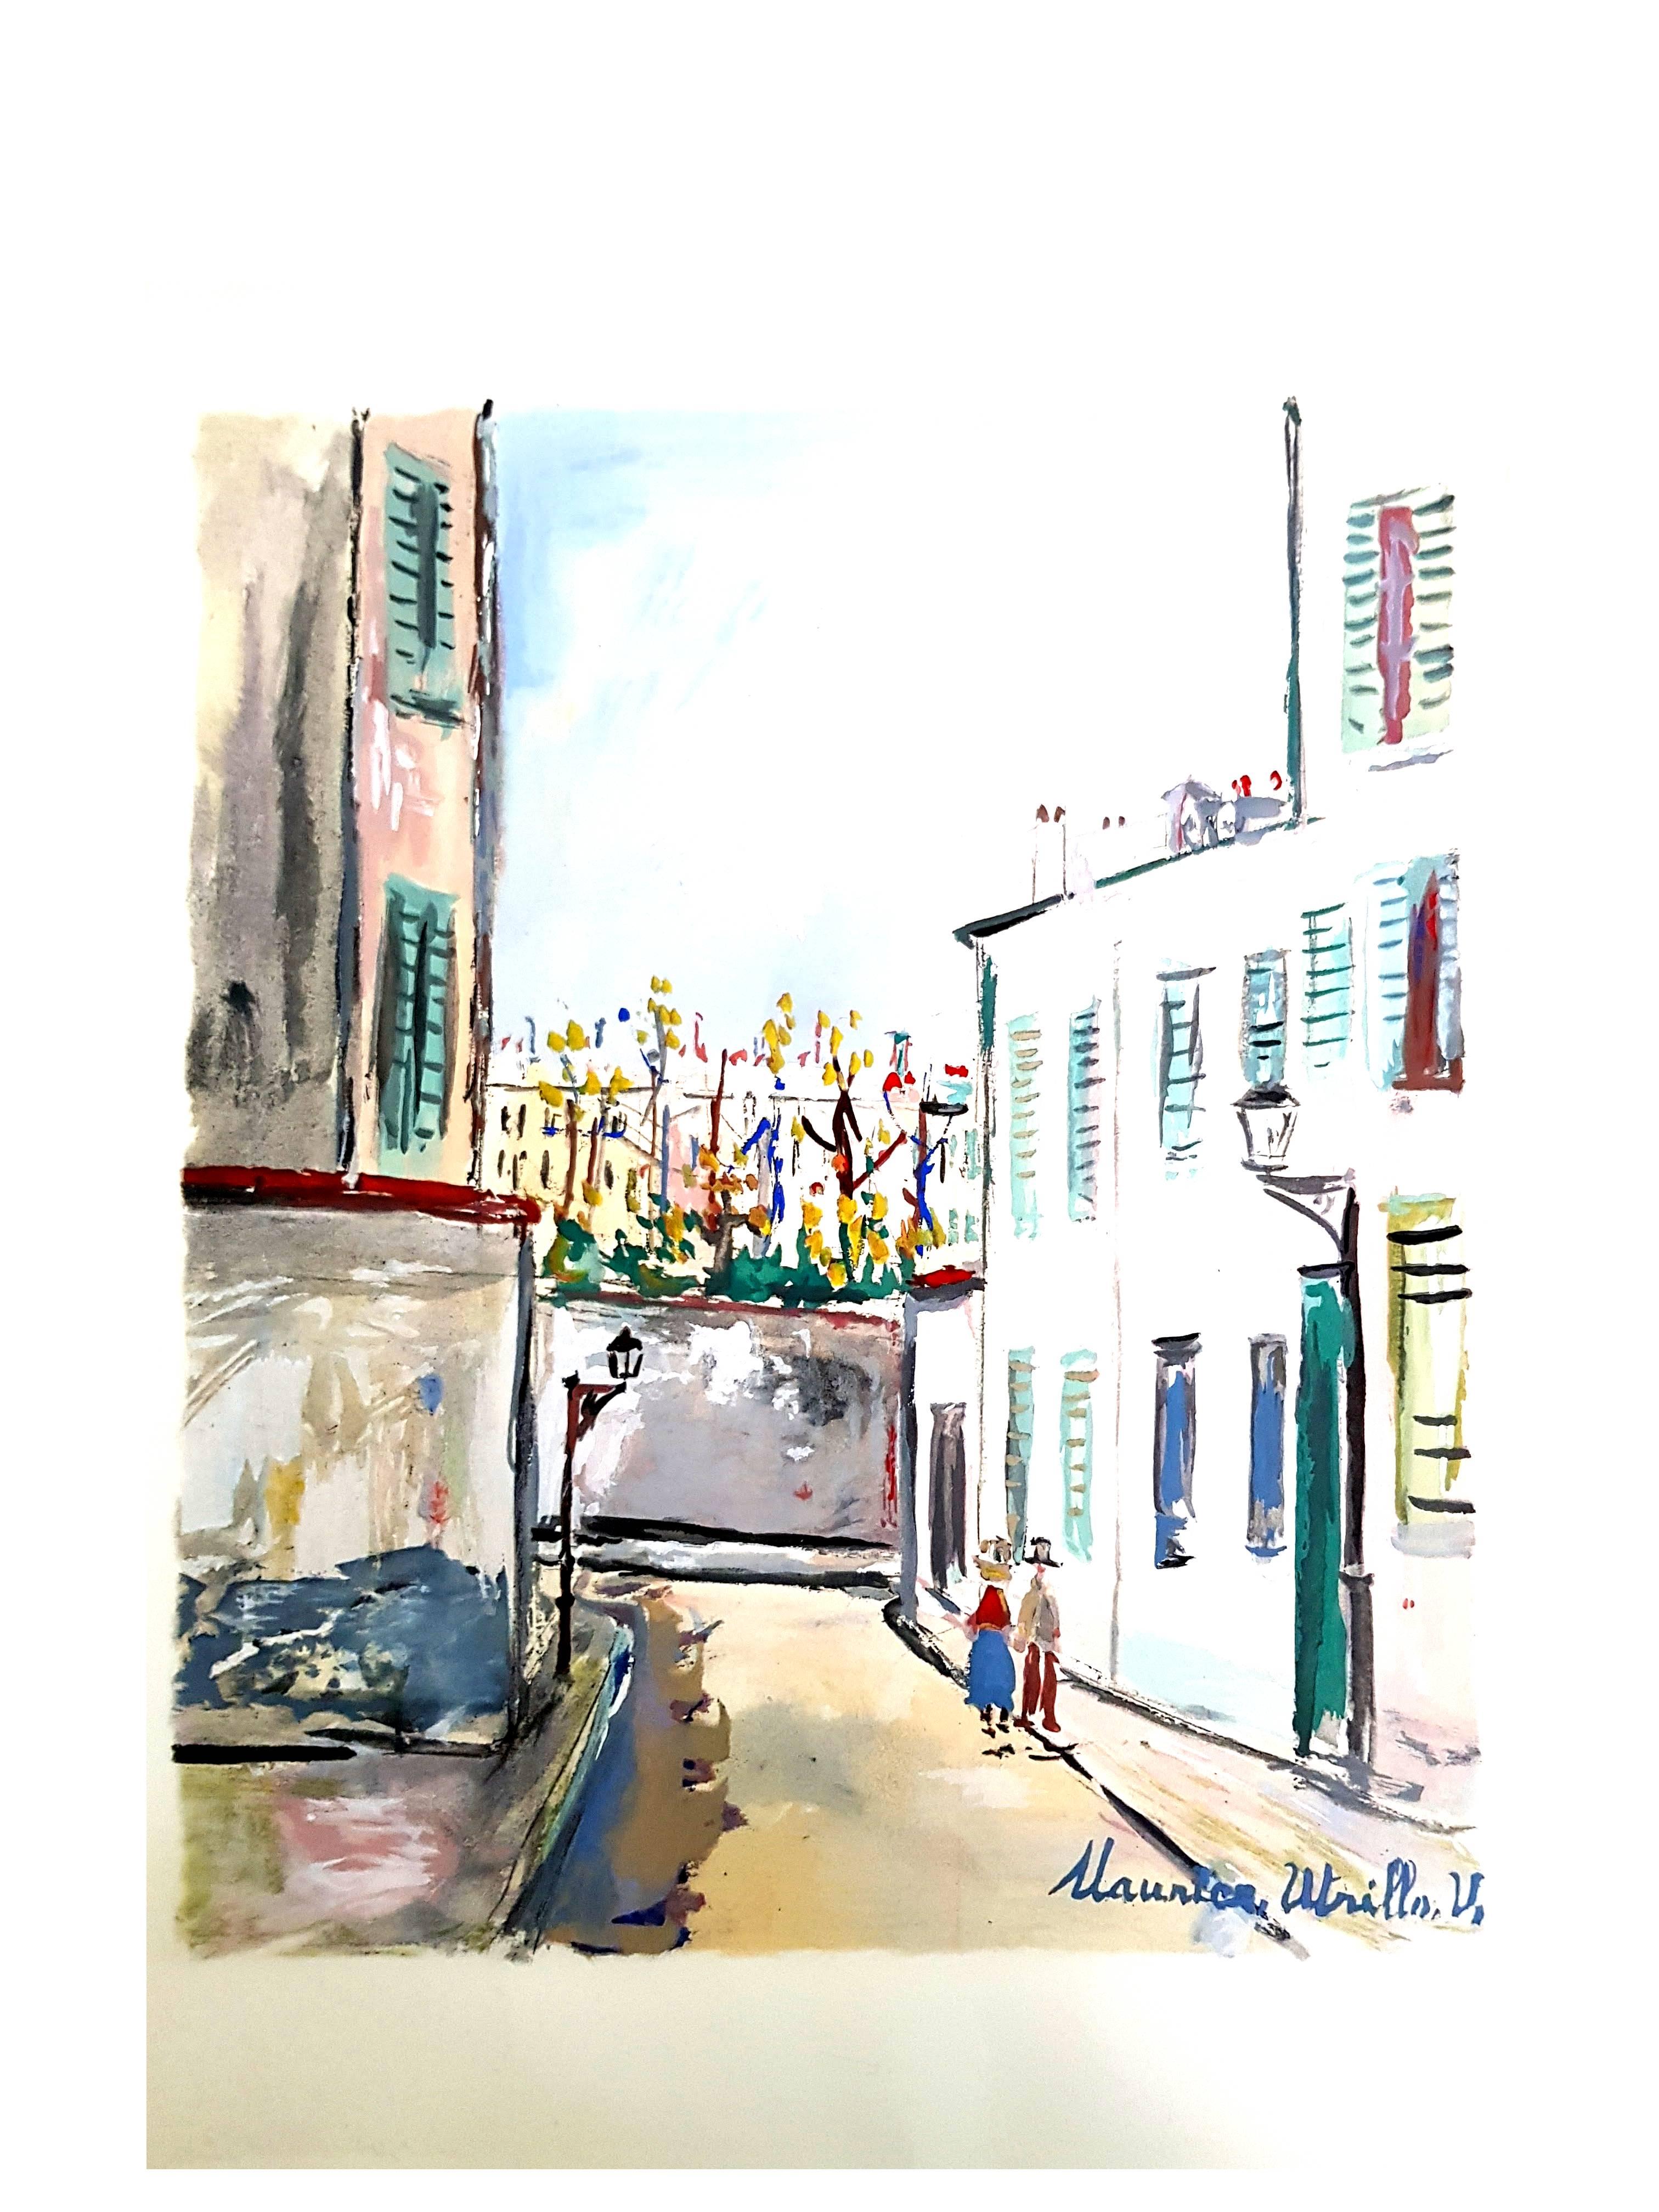 Inspired Village of Montmartre - Pochoir - Gray Landscape Print by (after) Maurice Utrillo